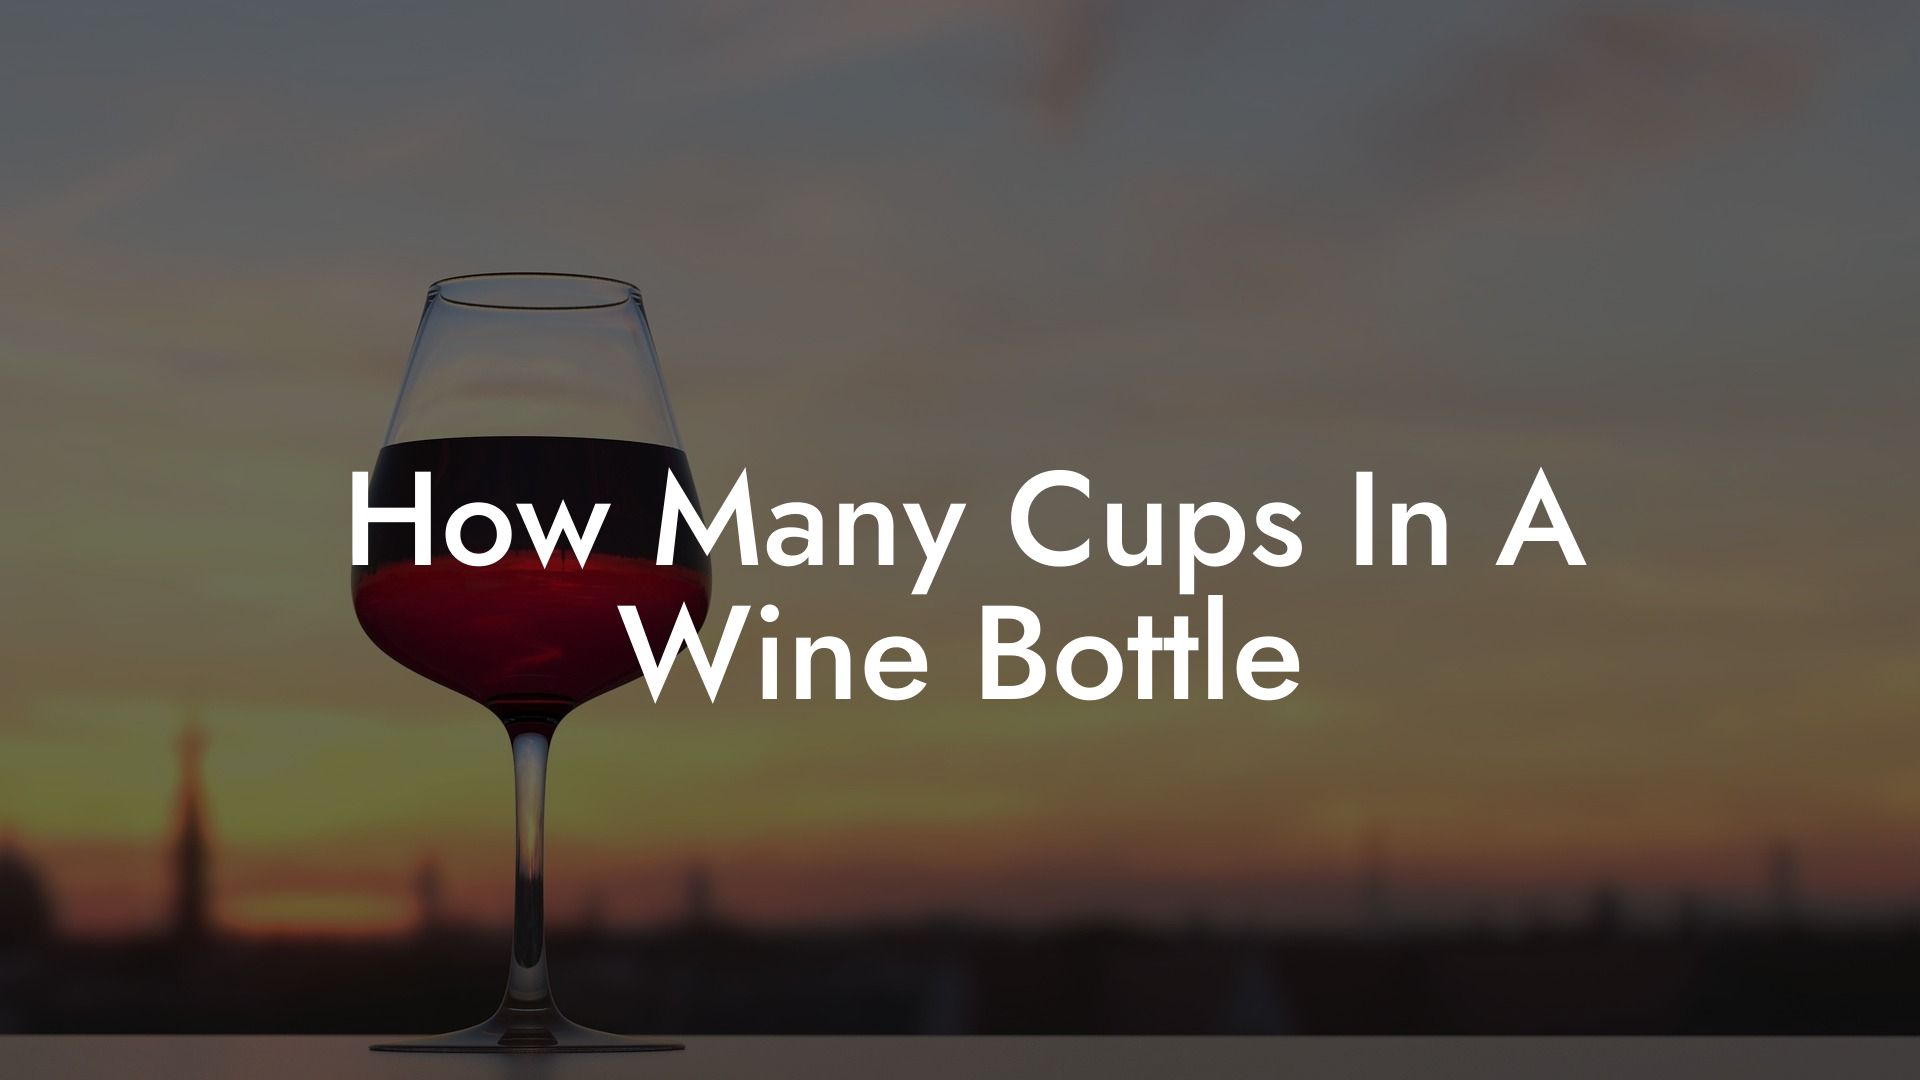 How Many Cups In A Wine Bottle